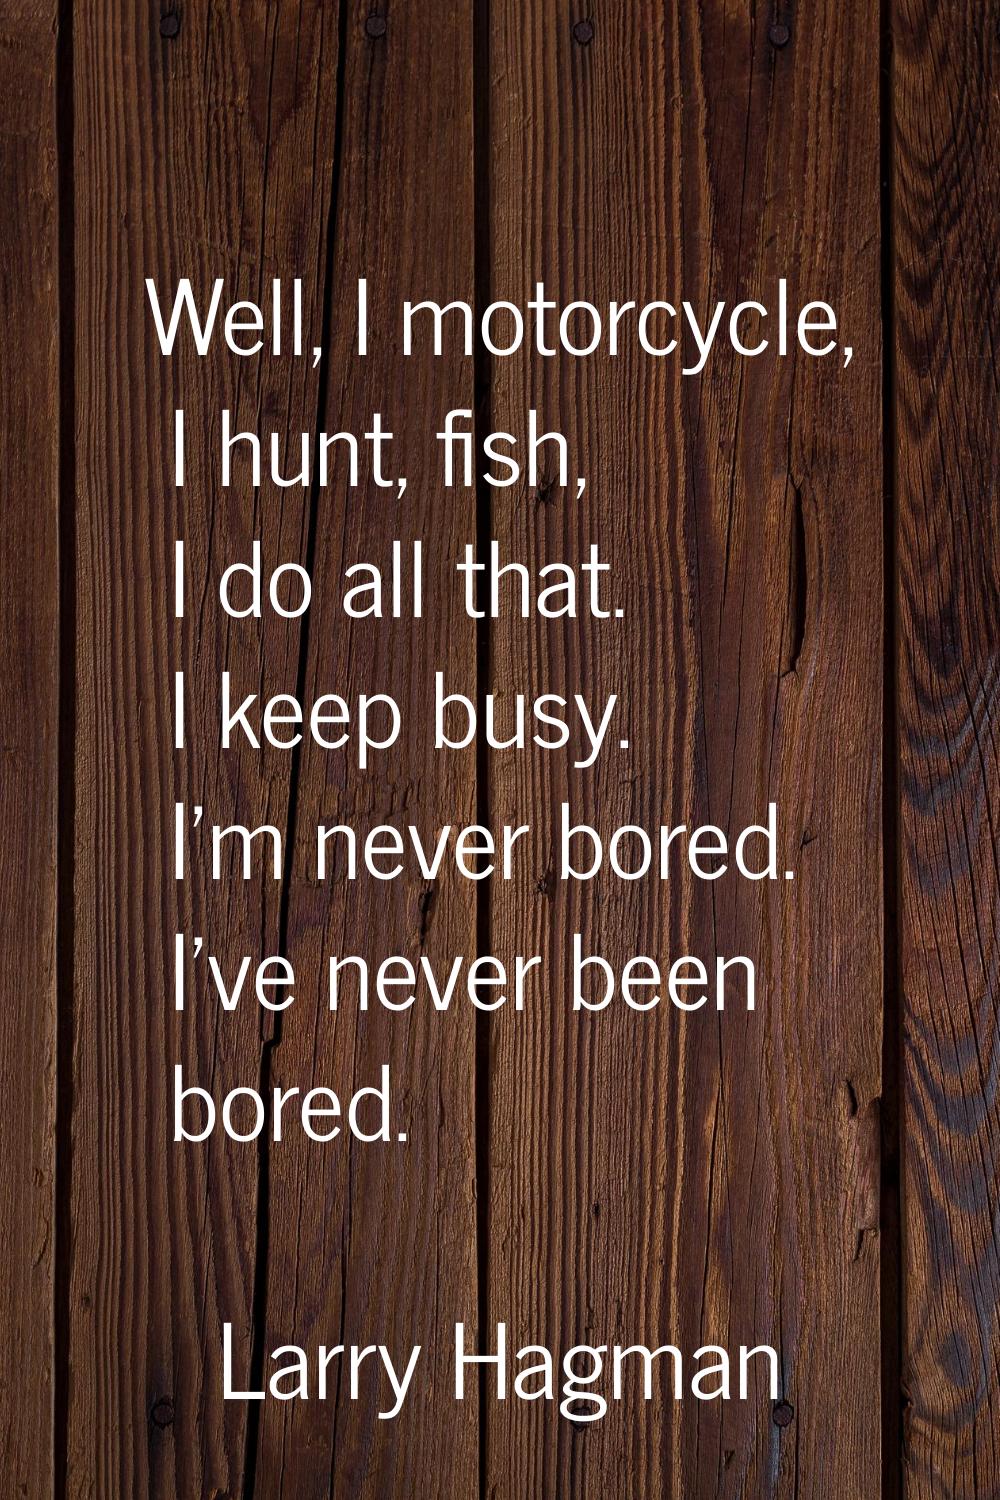 Well, I motorcycle, I hunt, fish, I do all that. I keep busy. I'm never bored. I've never been bore